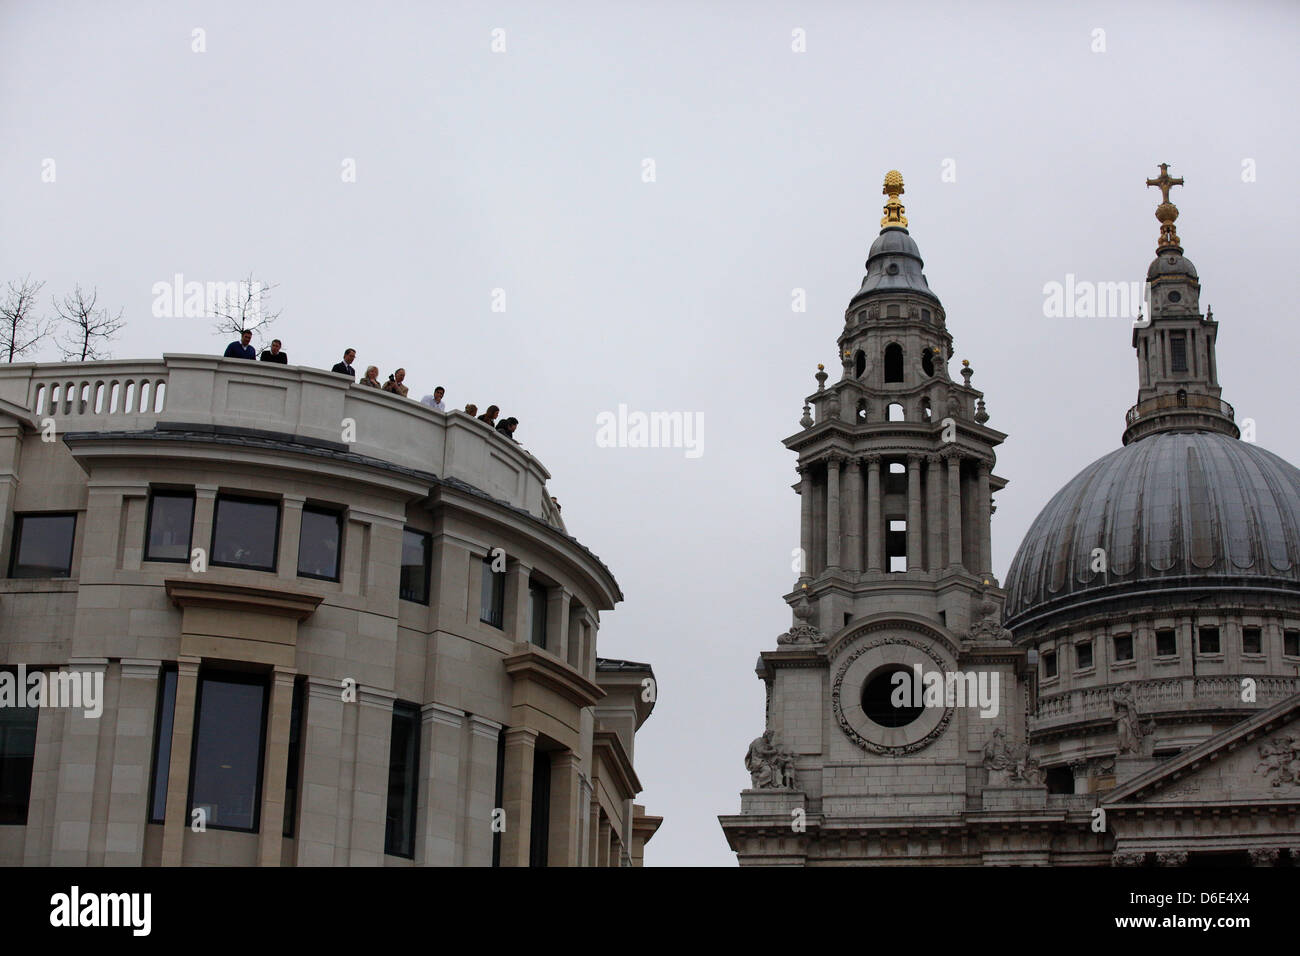 London, UK. 17th of April 2013.  The funeral of former prime minister Margaret Thatcher was held at St. Paul's Cathedral this morning. Some people chose high spots near St Paul's Cathedral. Credit: Lydia Pagoni/Alamy Live News Stock Photo